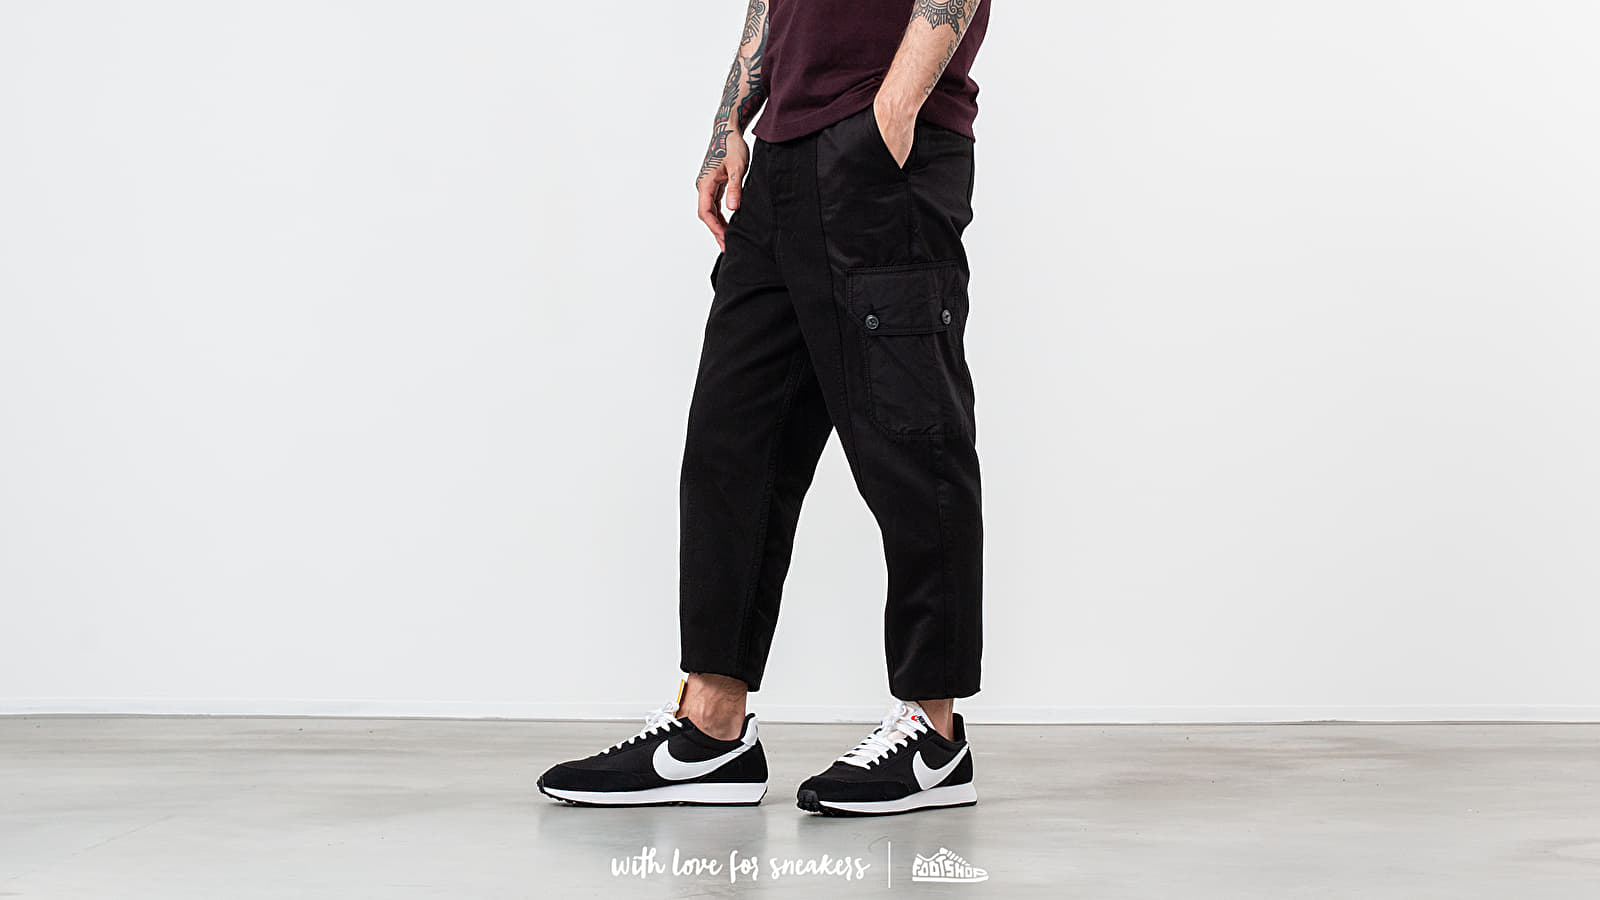 Pants and jeans Alexandre Mattiussi Patchwork Oversized Carrot Fit Trousers Black